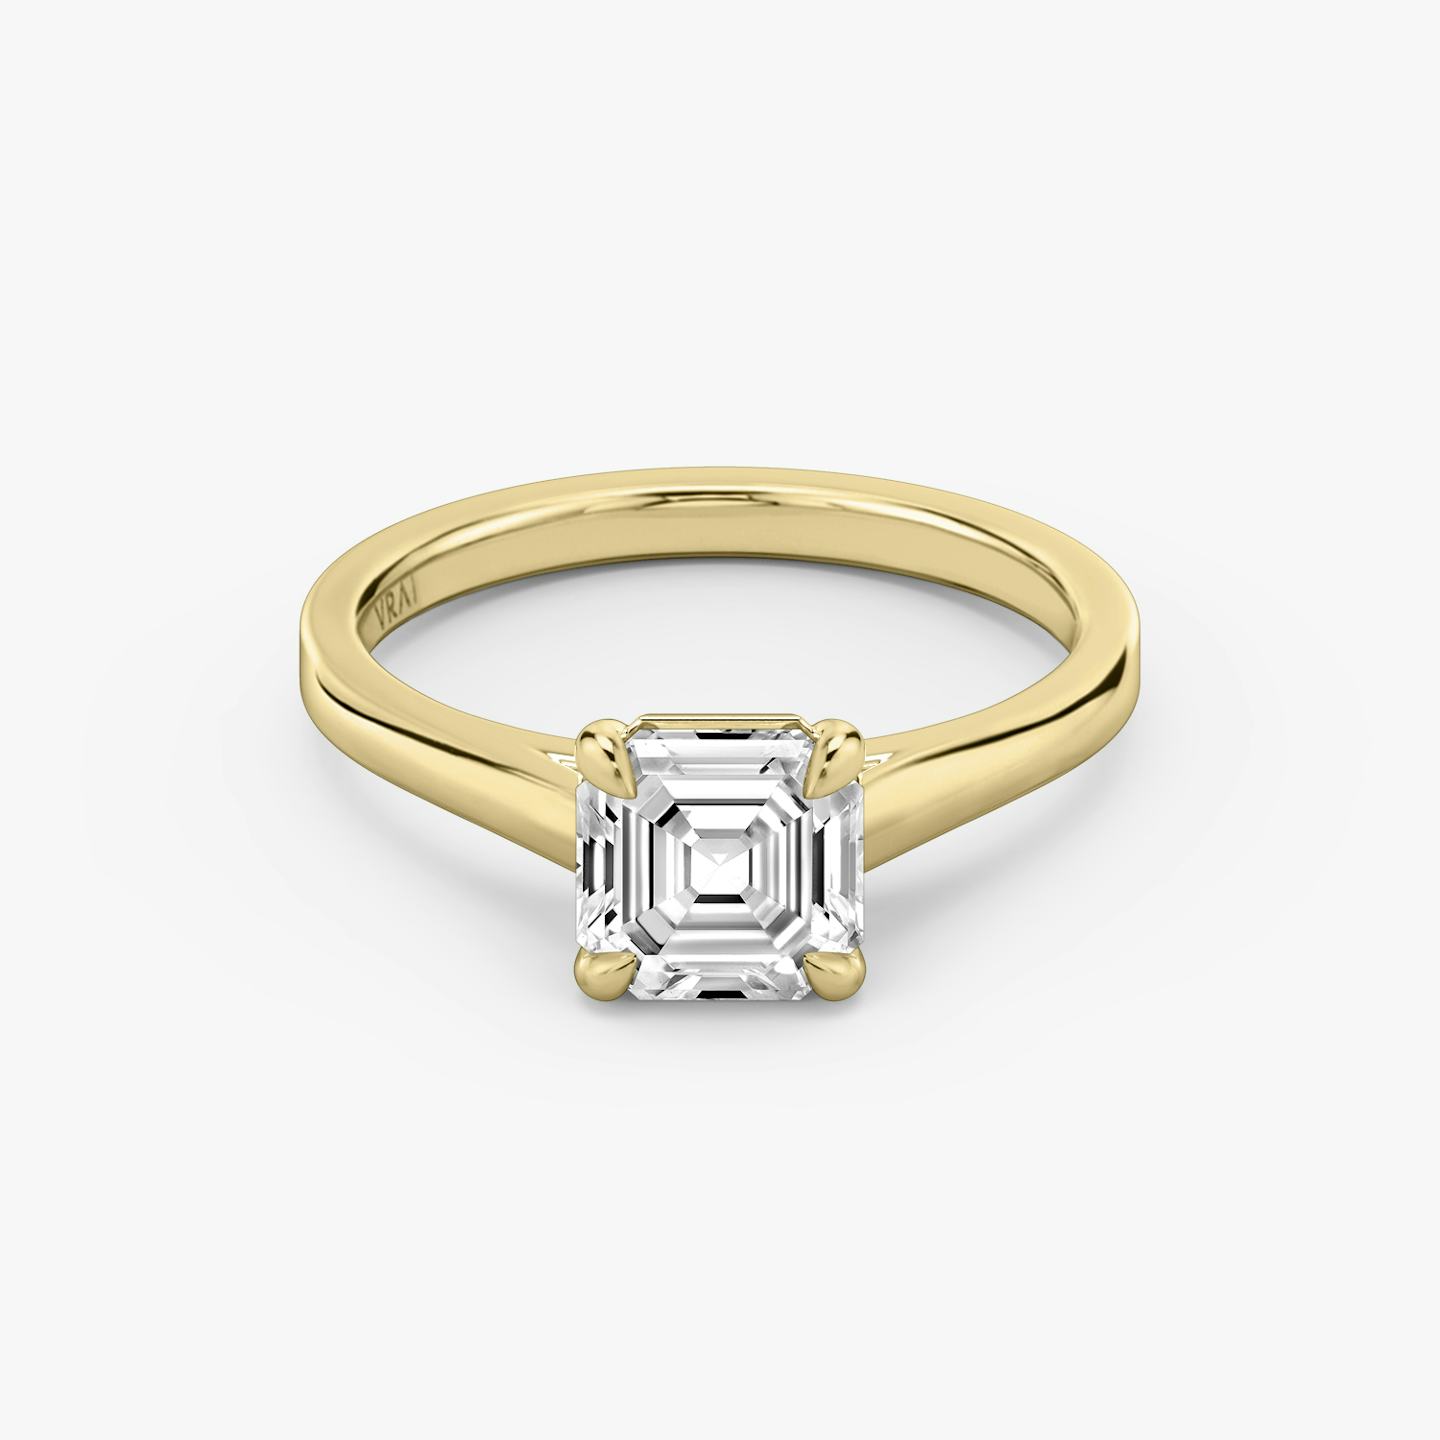 Cathedral Asscher engagement ring